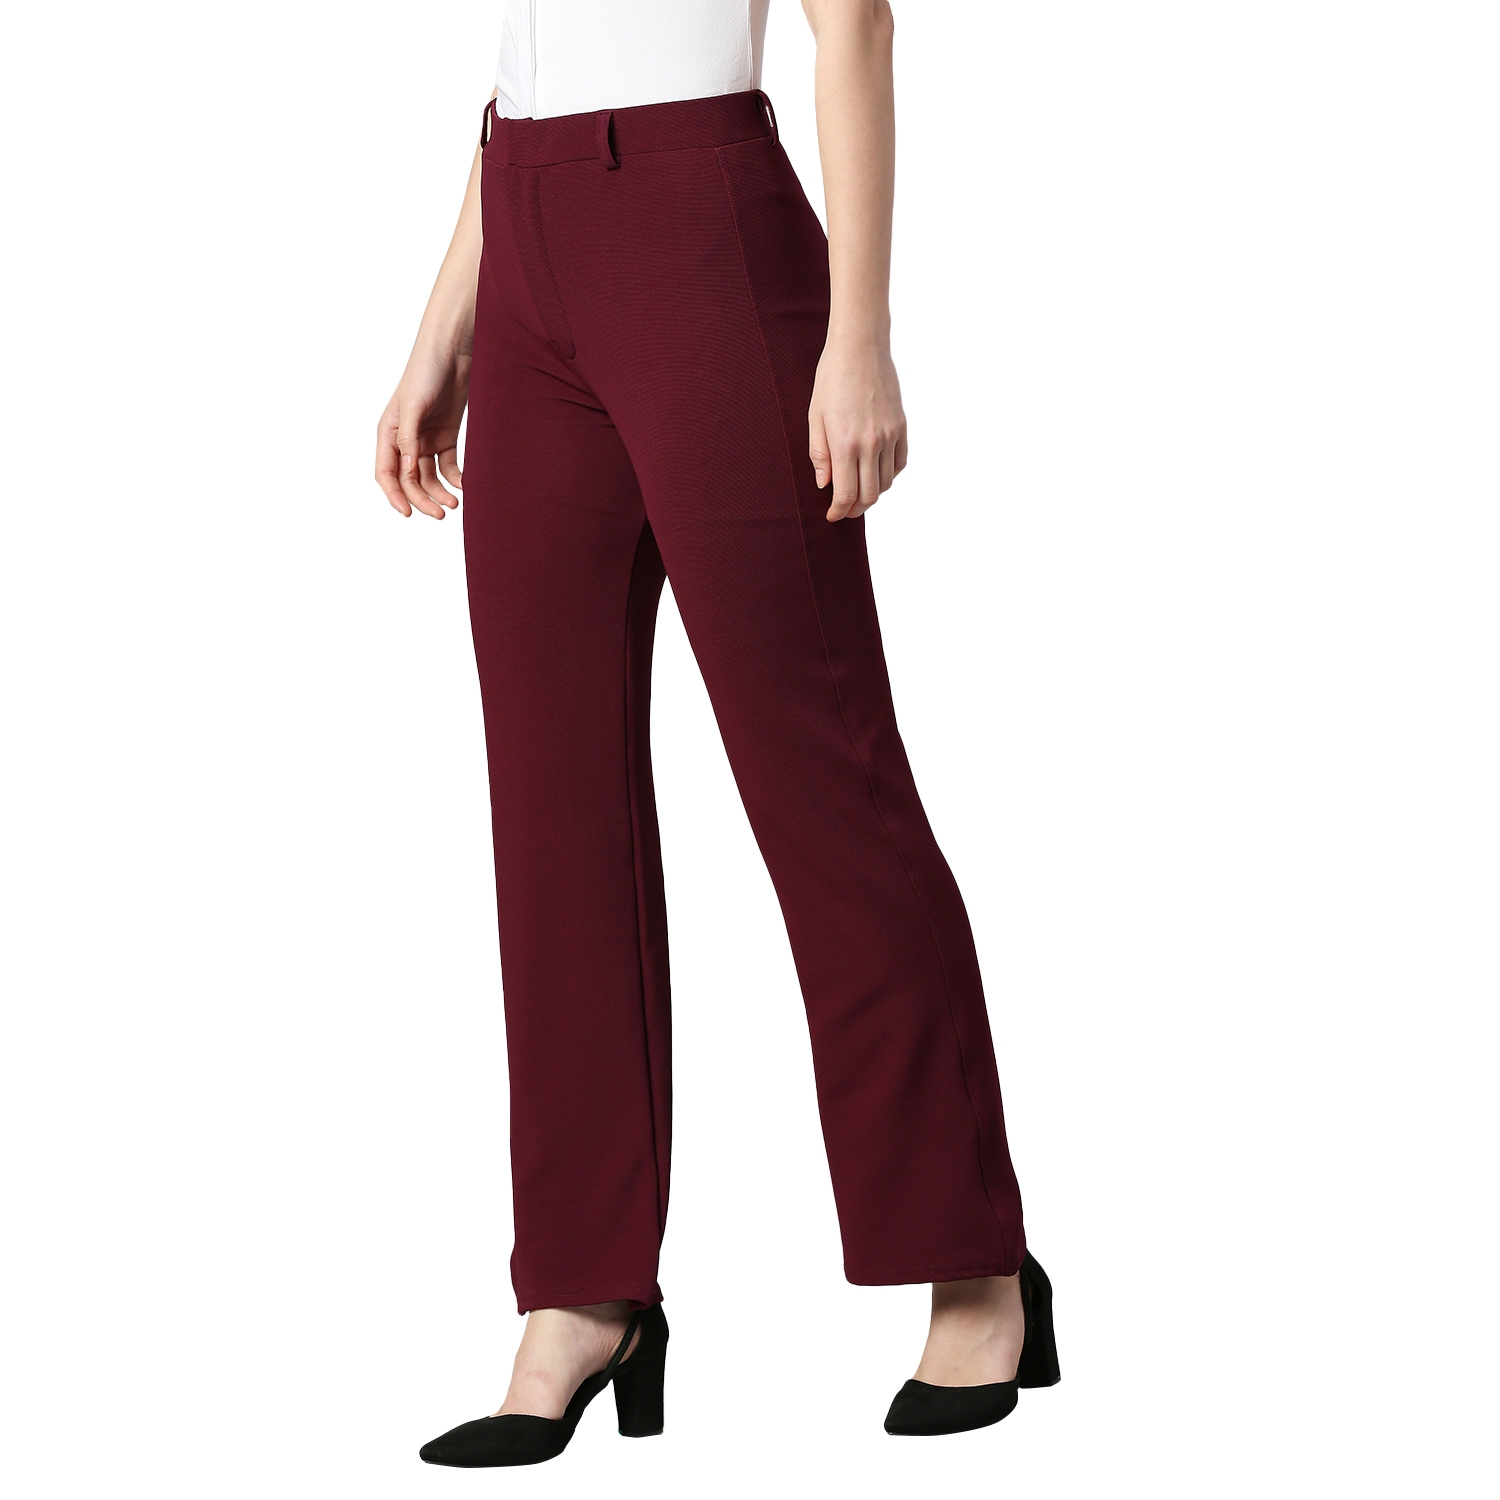 Pacelli Pleated Baggy Fit Burgundy Dress Pants